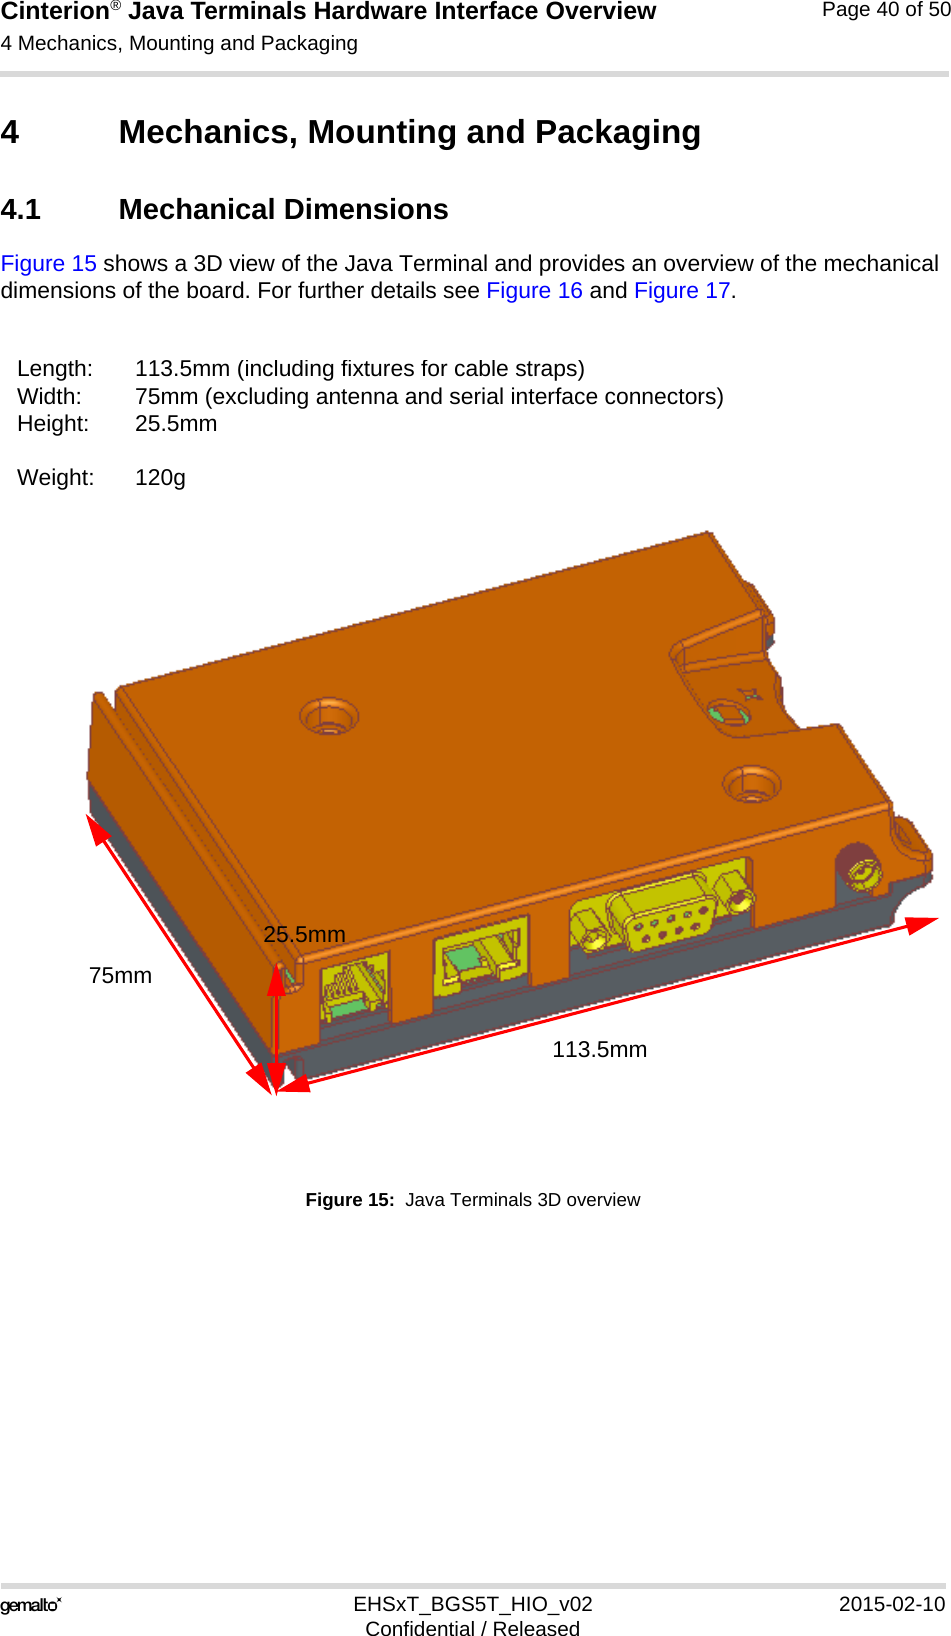 Cinterion® Java Terminals Hardware Interface Overview4 Mechanics, Mounting and Packaging44EHSxT_BGS5T_HIO_v02 2015-02-10Confidential / ReleasedPage 40 of 504 Mechanics, Mounting and Packaging4.1 Mechanical DimensionsFigure 15 shows a 3D view of the Java Terminal and provides an overview of the mechanical dimensions of the board. For further details see Figure 16 and Figure 17. Figure 15:  Java Terminals 3D overviewLength: 113.5mm (including fixtures for cable straps)Width: 75mm (excluding antenna and serial interface connectors)Height: 25.5mmWeight: 120g113.5mm75mm25.5mm